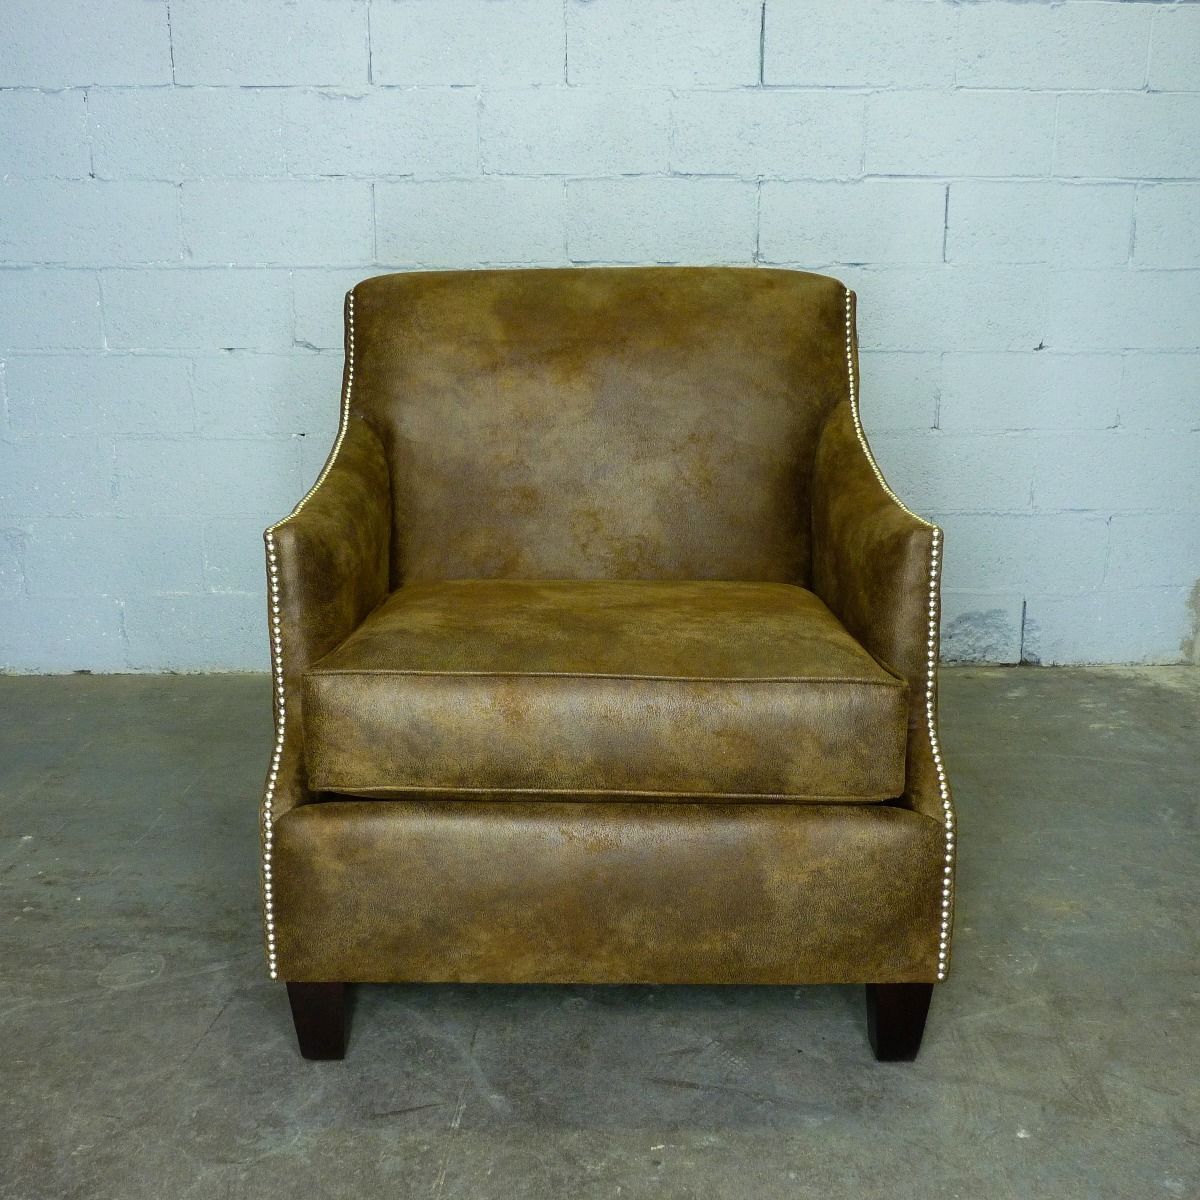 Vintage Industrial Leather Arm Chair - Nordic Side - 10-18, feed-cl0-over-80-dollars, furniture-pipeline, furniture-tag, US